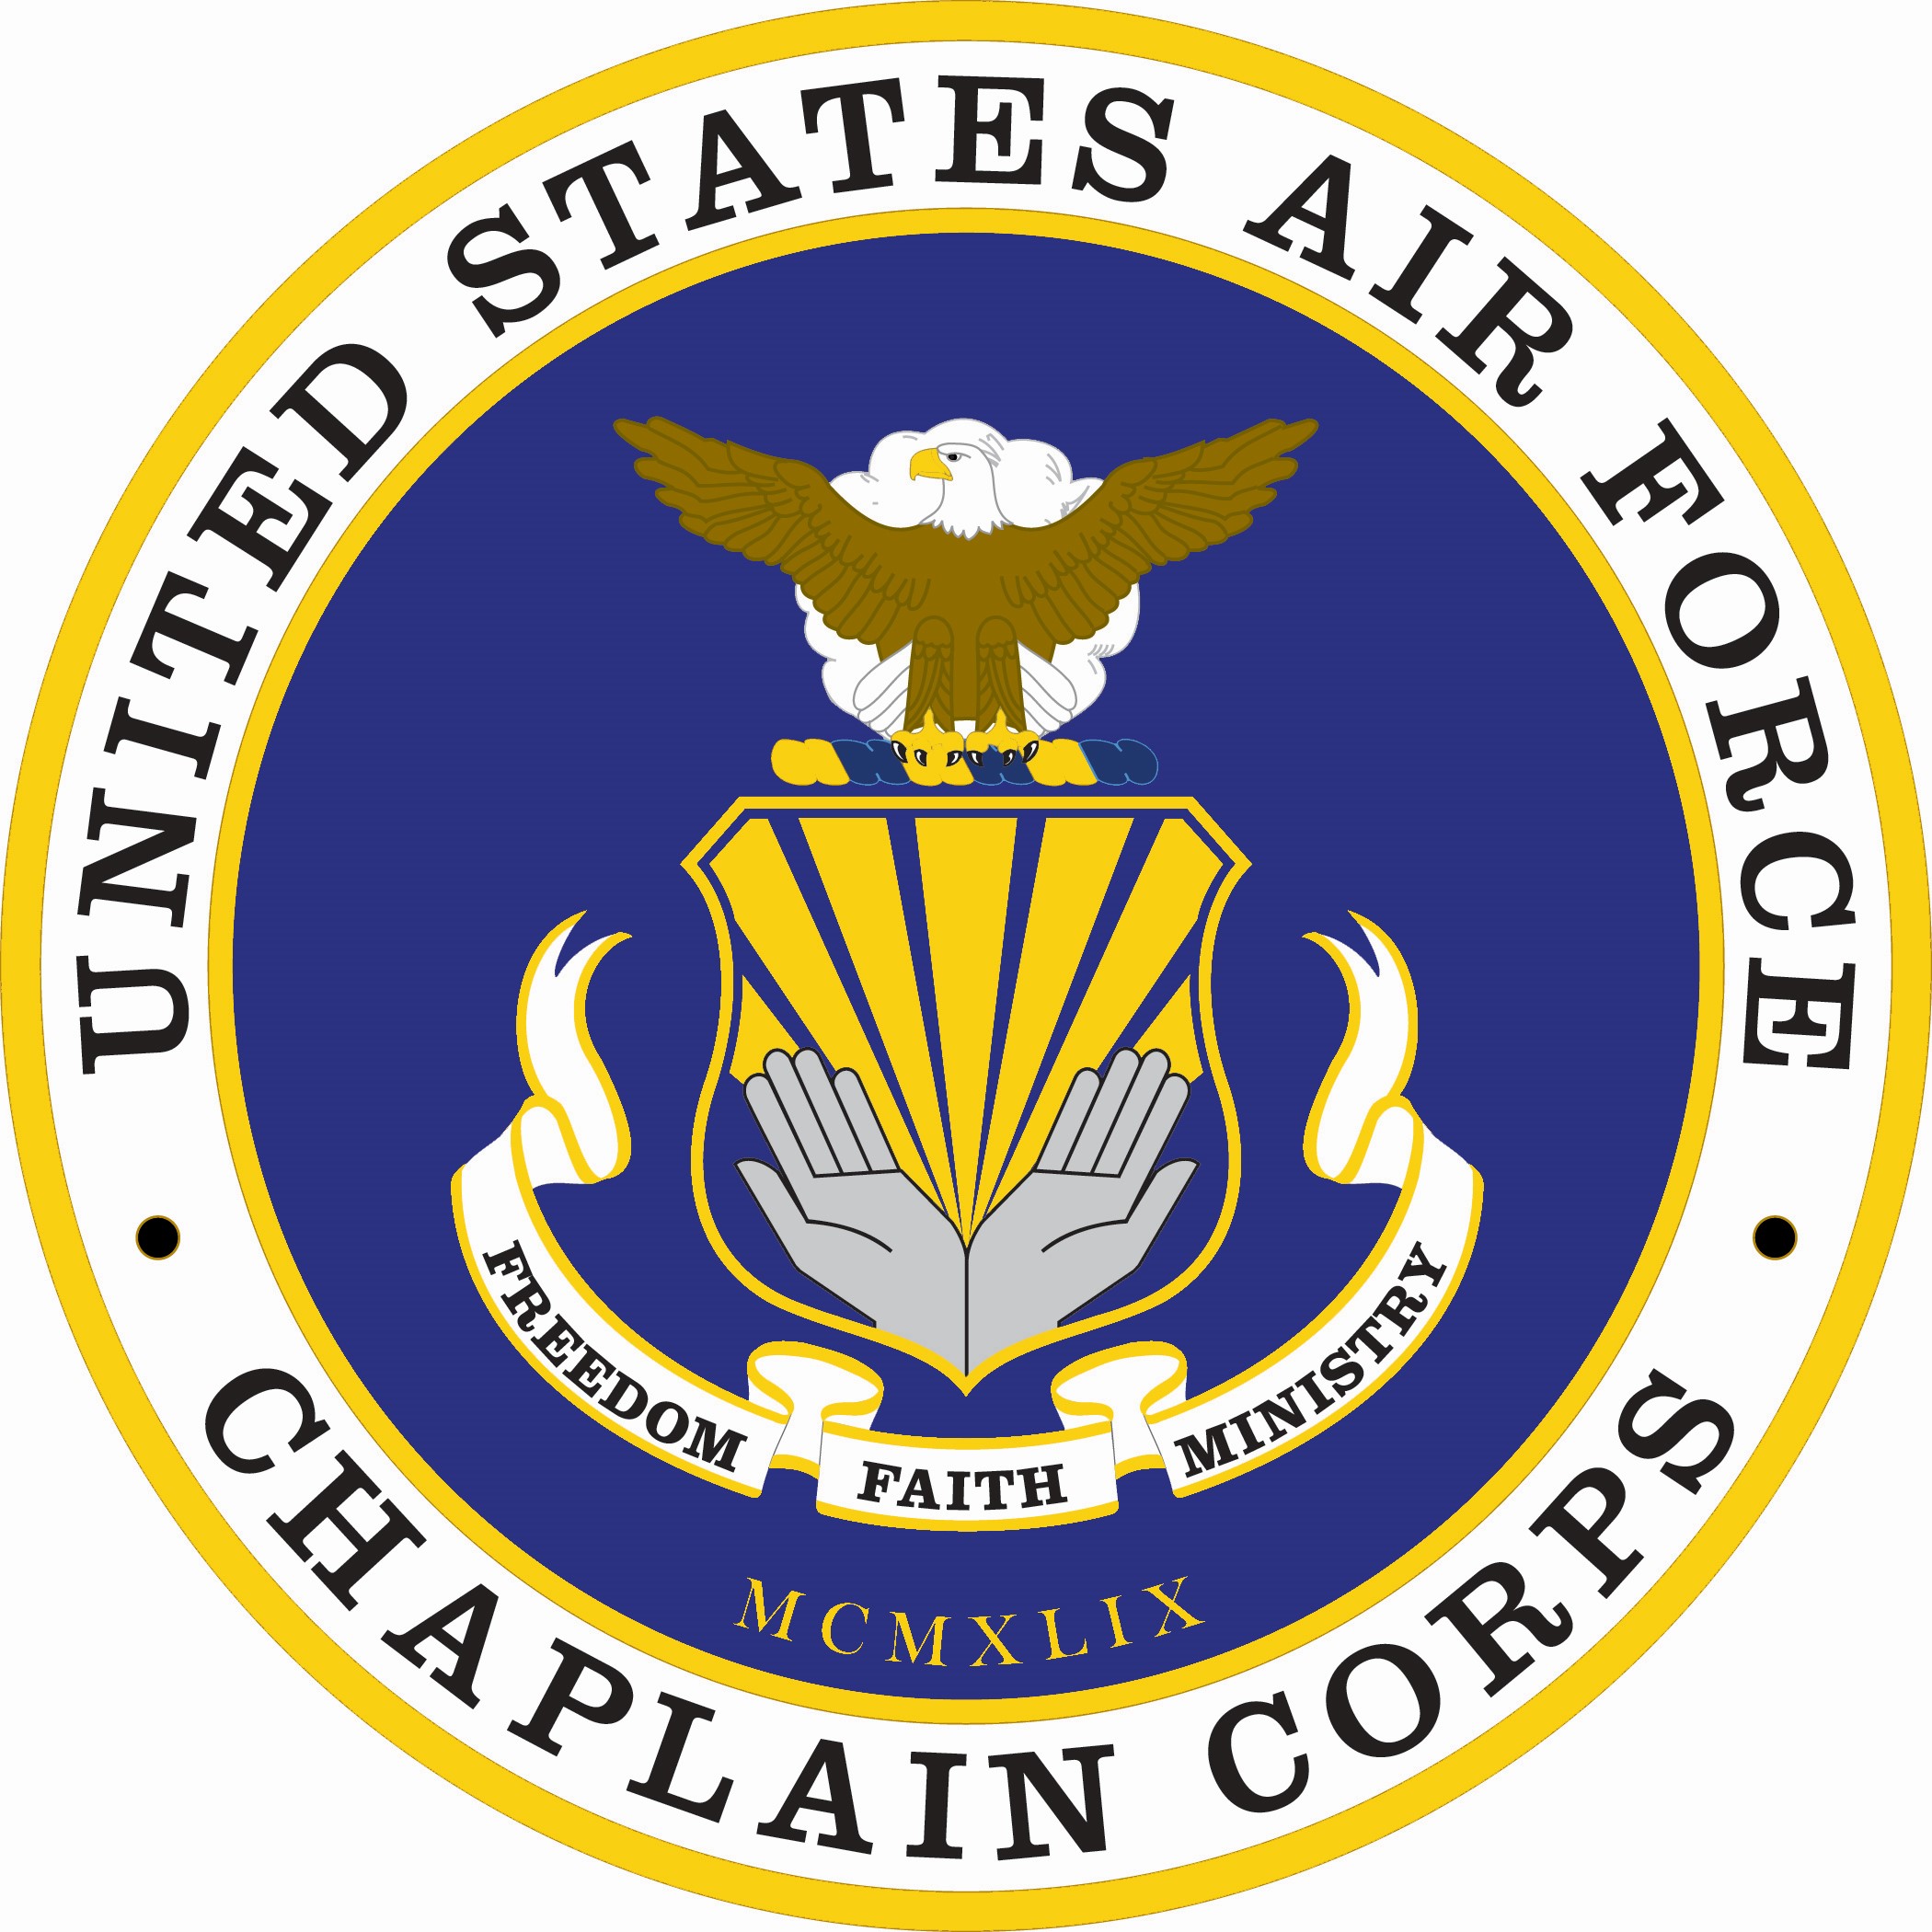 image of the Air Force Chaplain corps